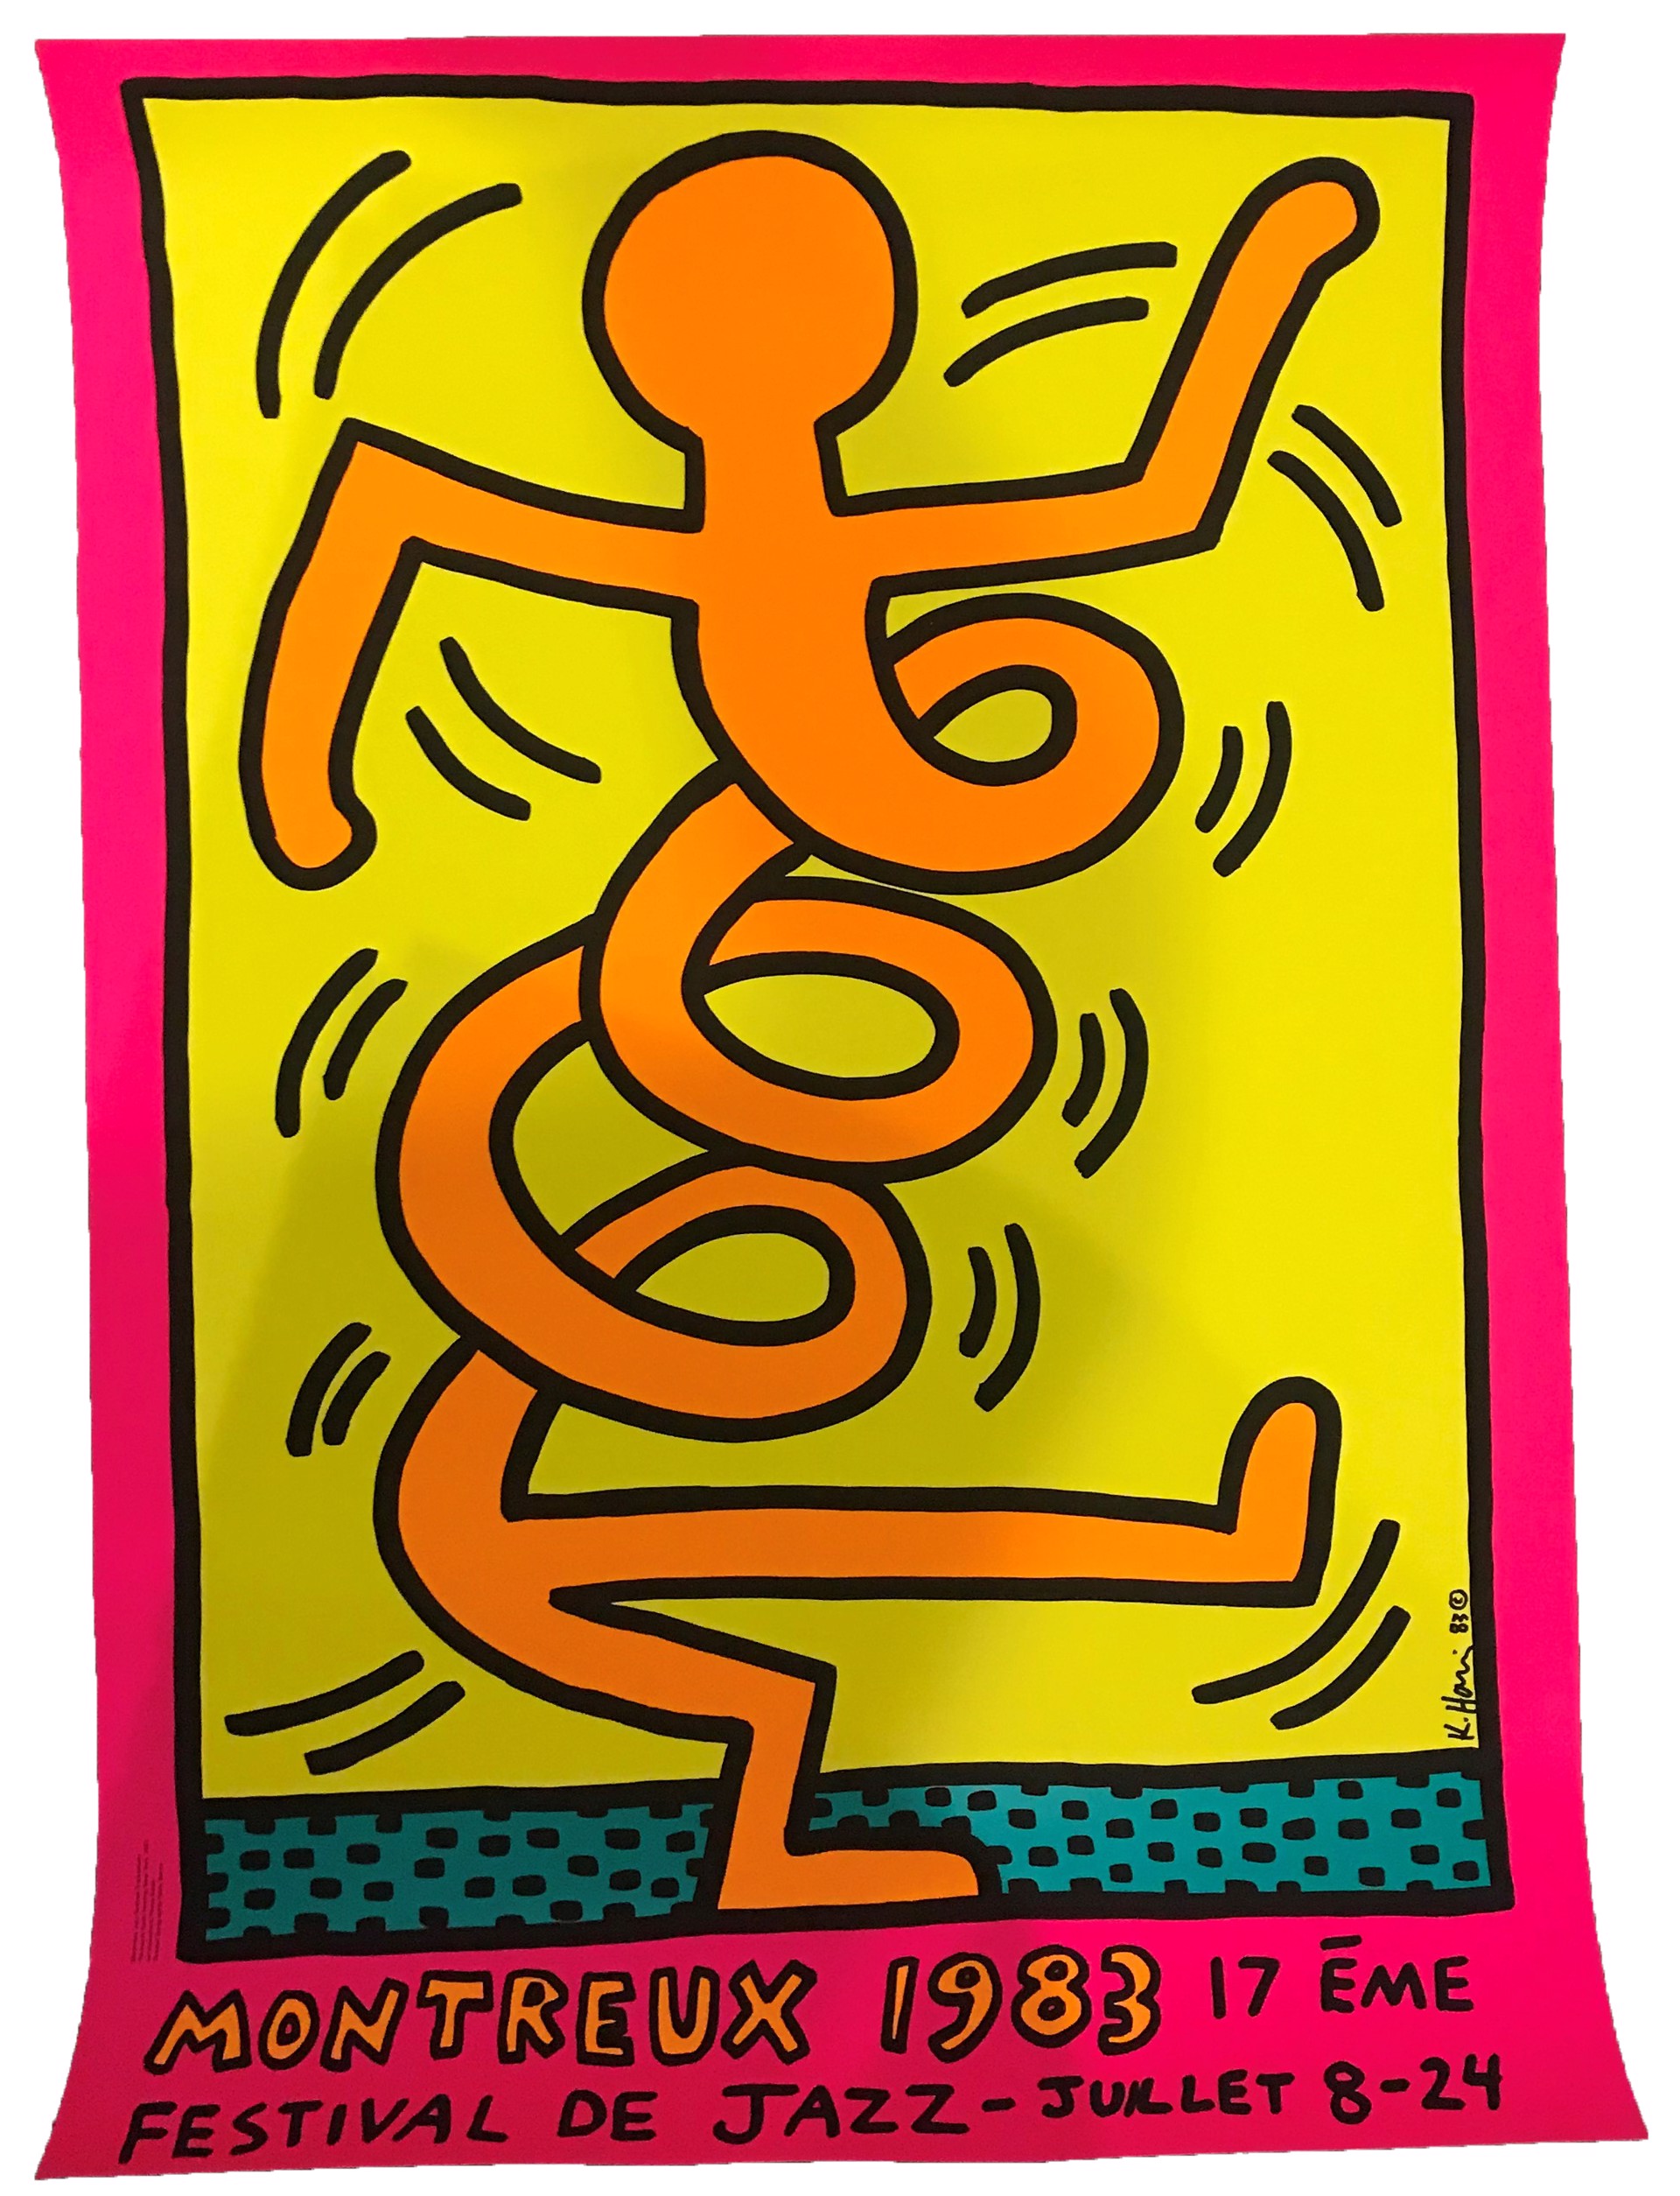 Montreux Festival De Jazz (Magenta Background) by Keith Haring (1958 - 1990)